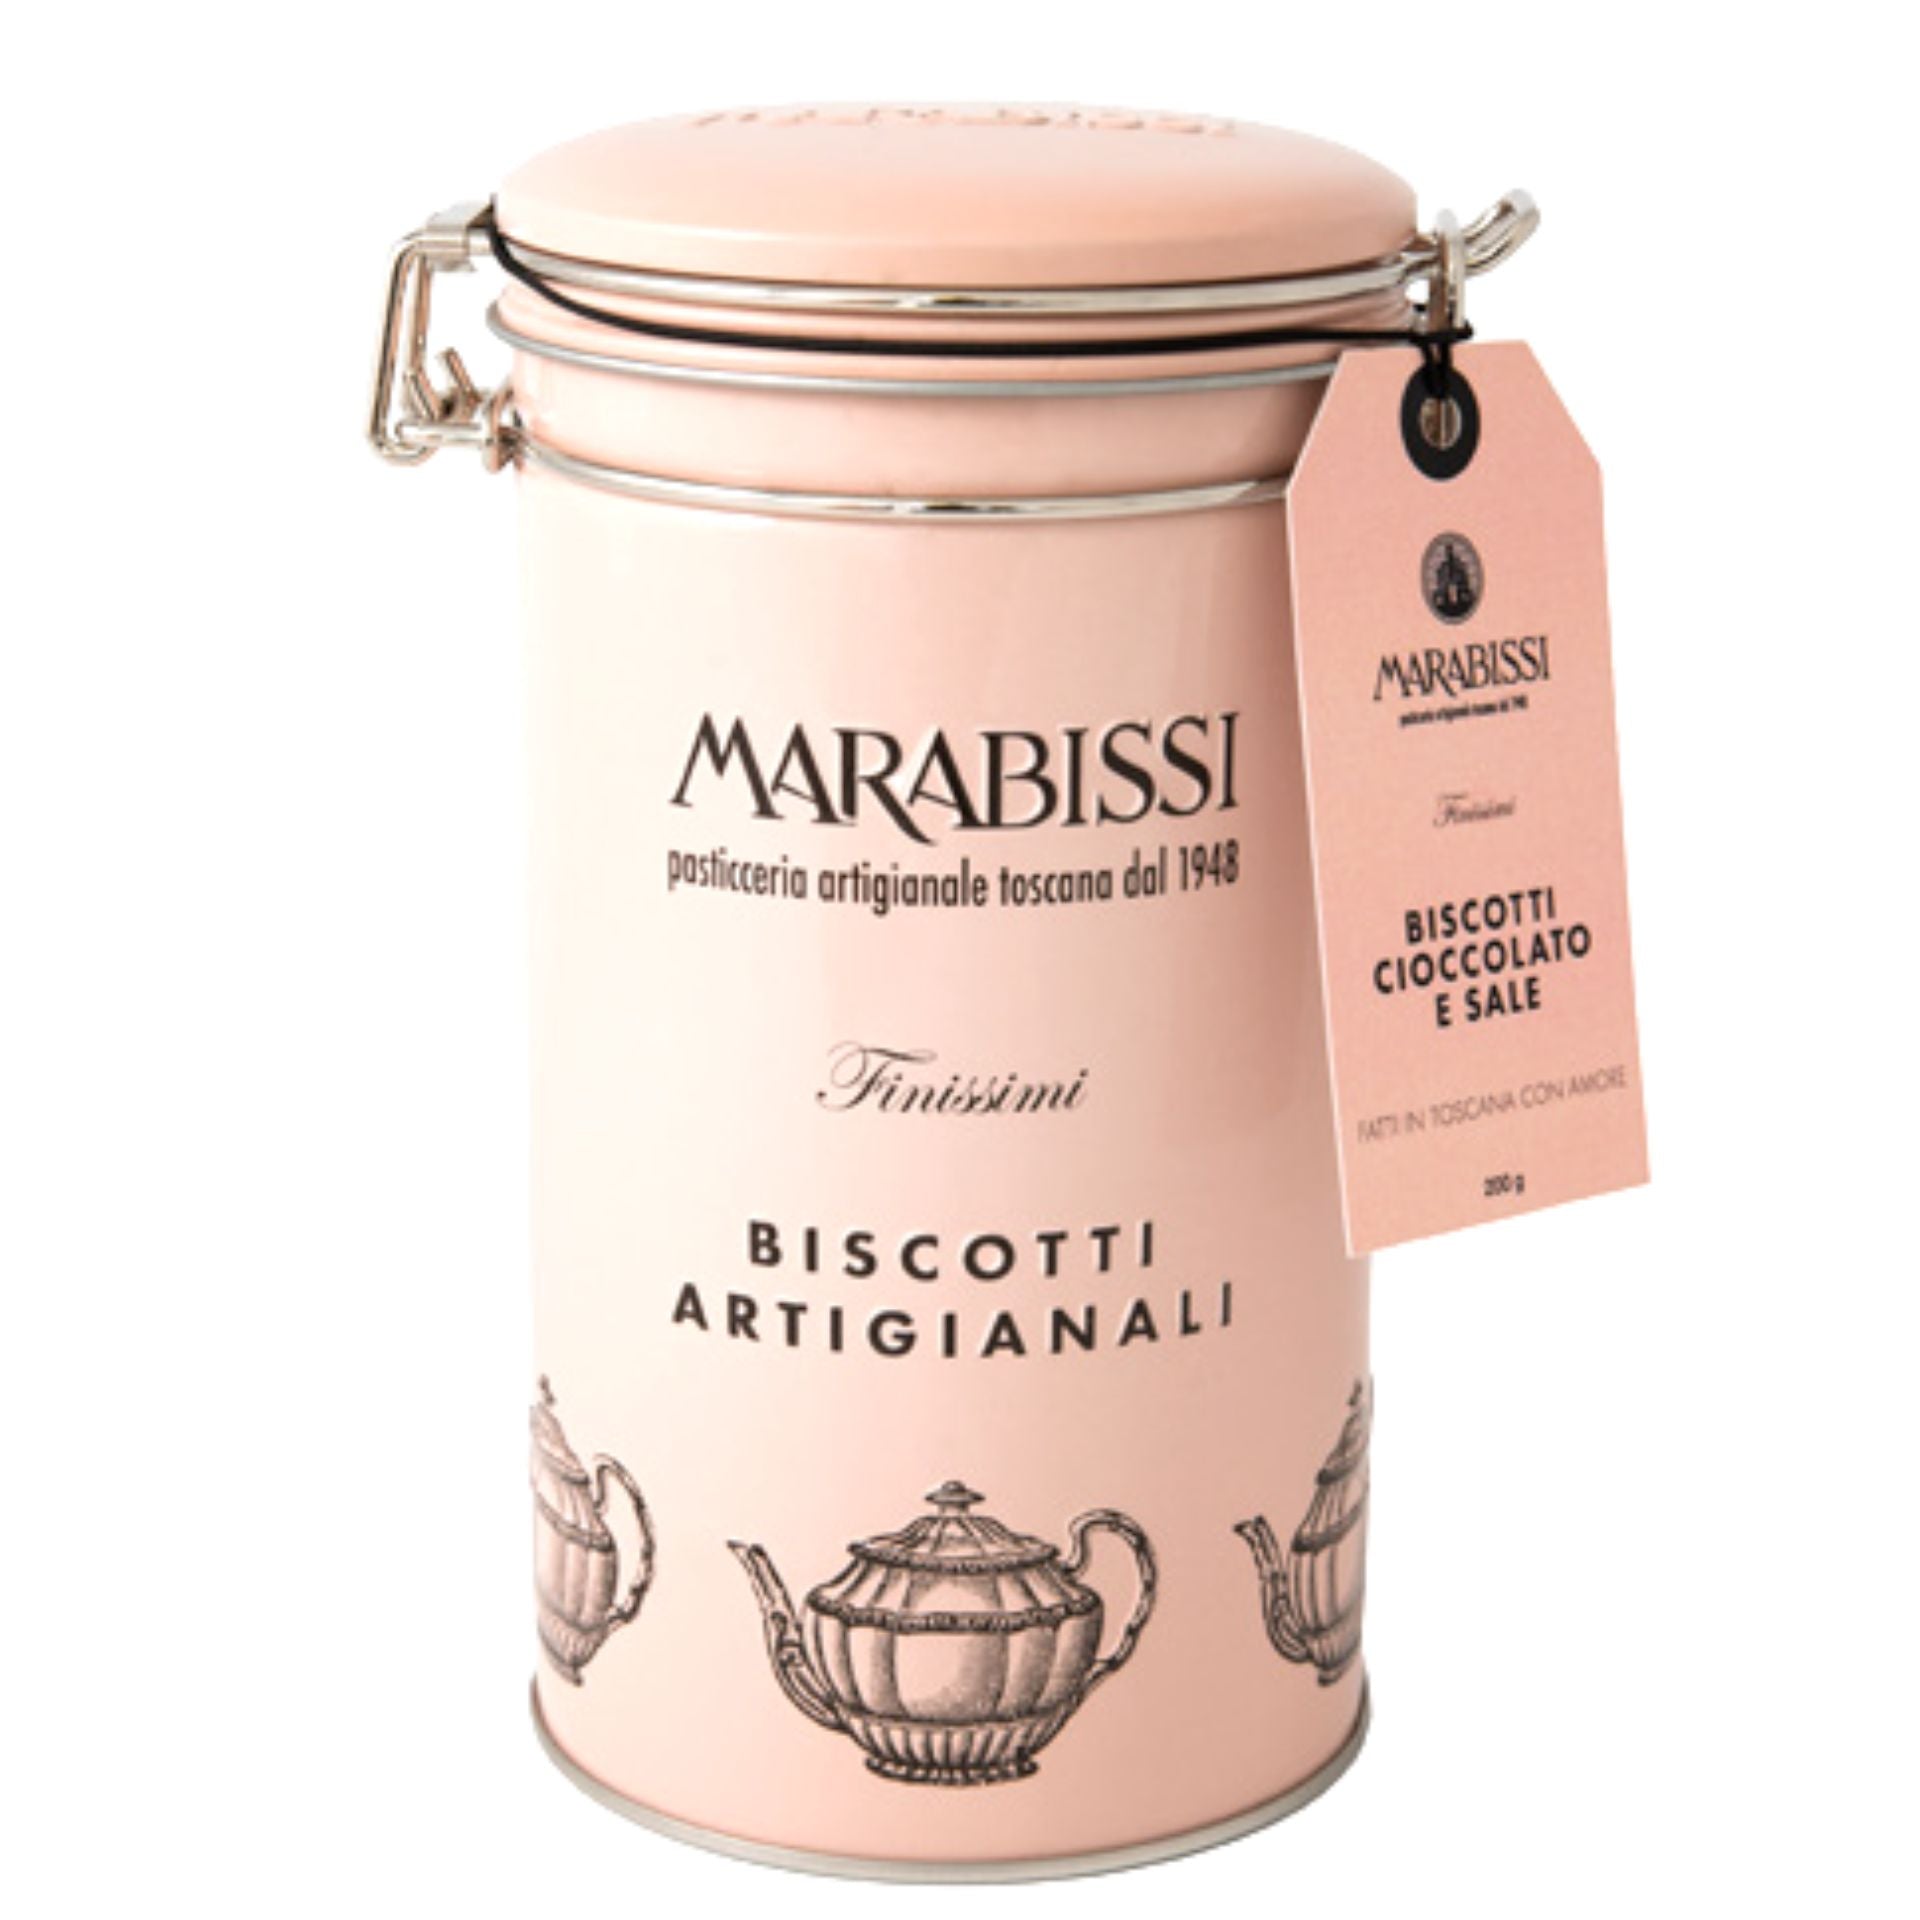 Marabissi Chocolate & Sea Salt Artisan Biscuits (Tin) 200g  | Imported and distributed in the UK by Just Gourmet Foods